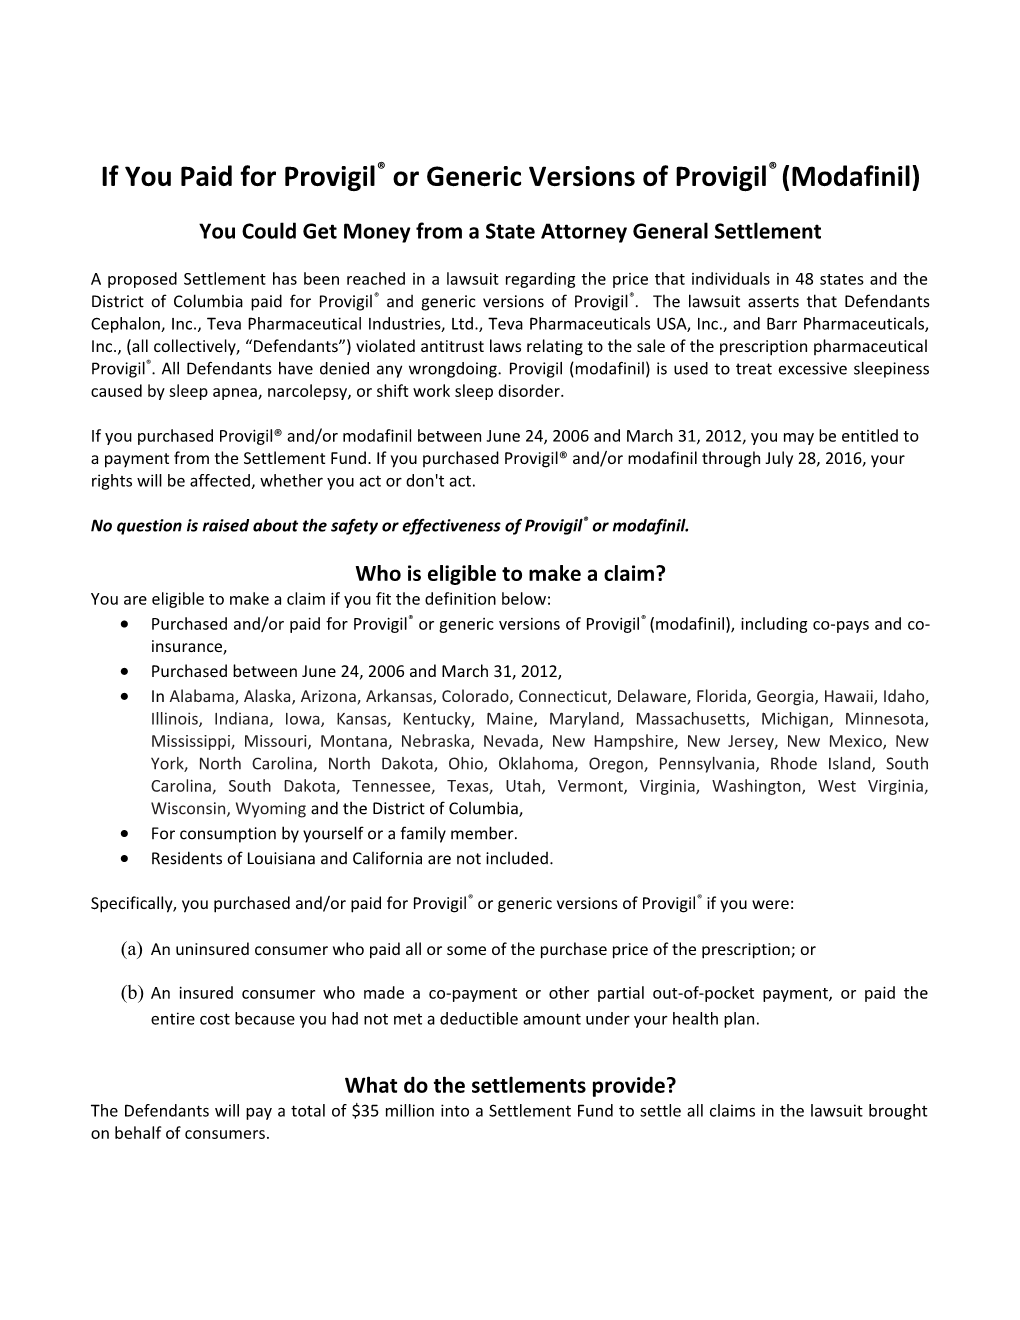 If You Paid for Provigil Or Generic Versions of Provigil (Modafinil)